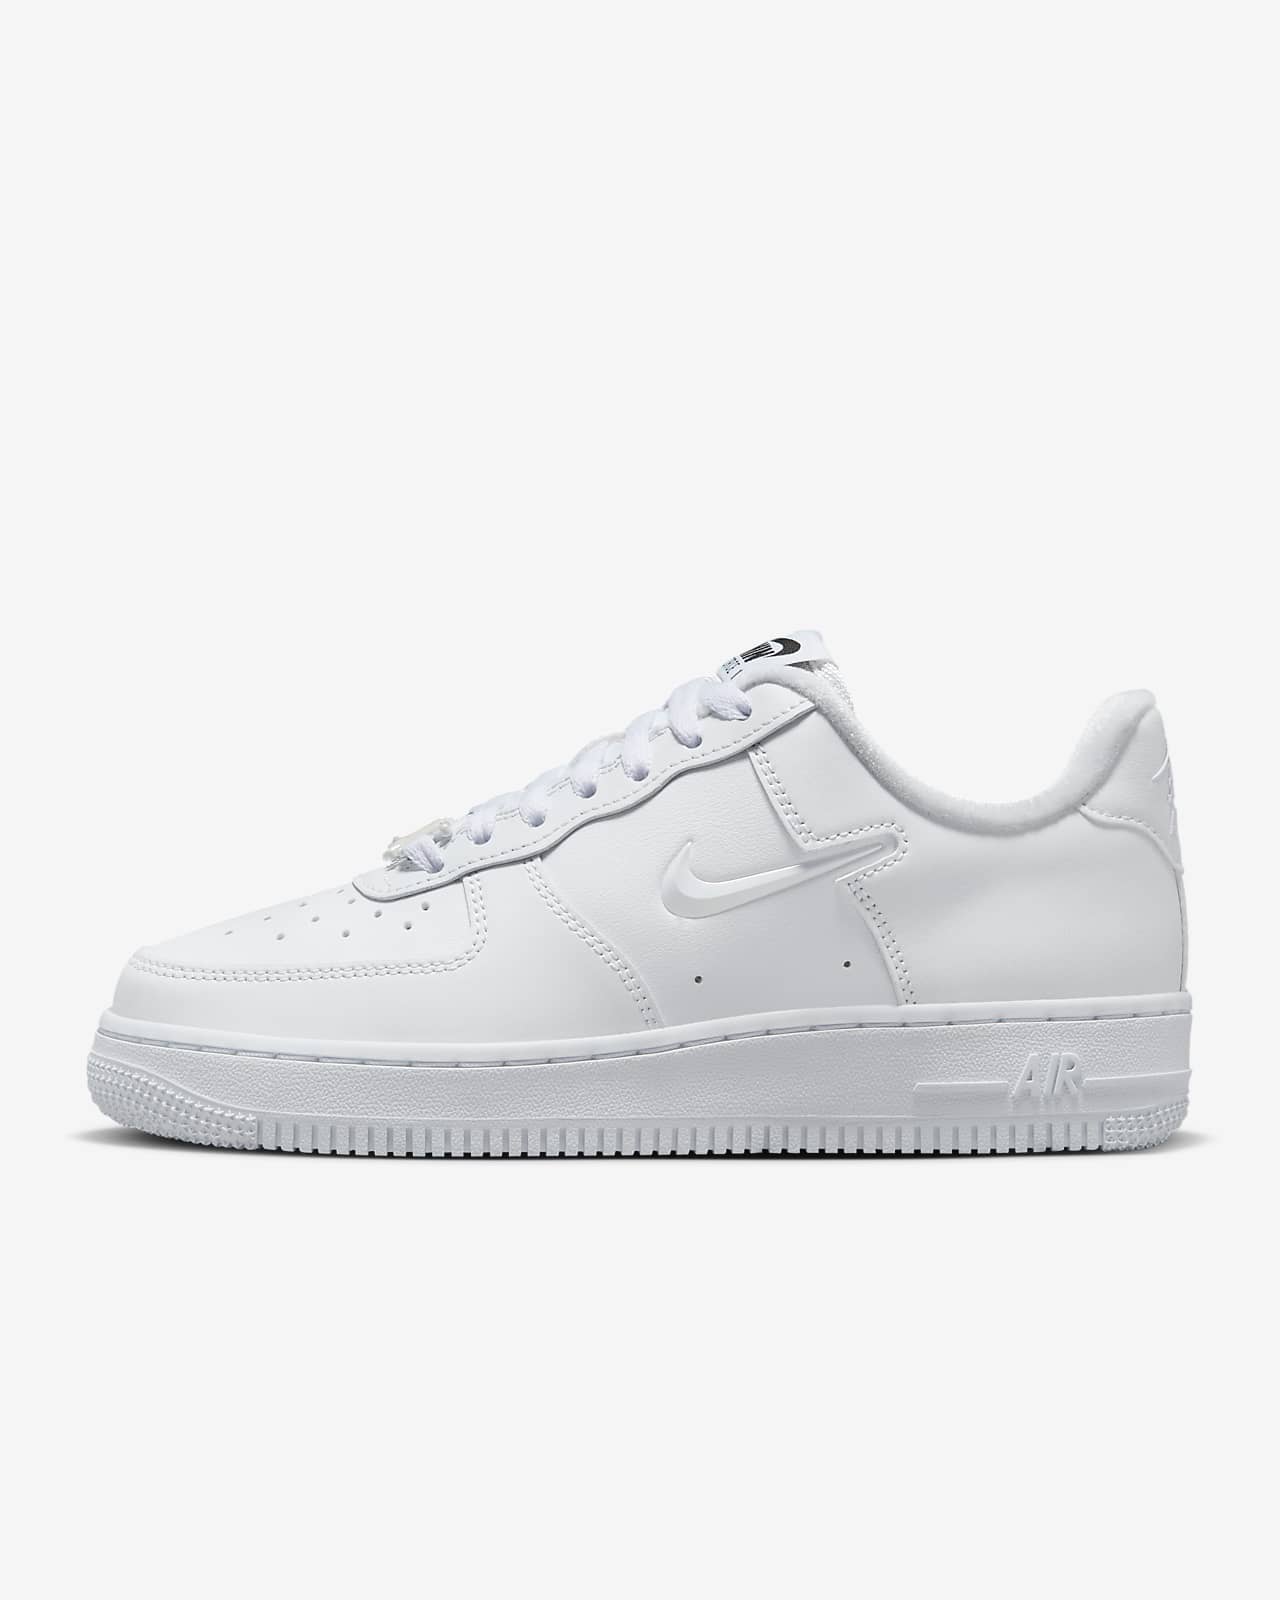 Nike Air Force 1 07 Womens Shoes Review